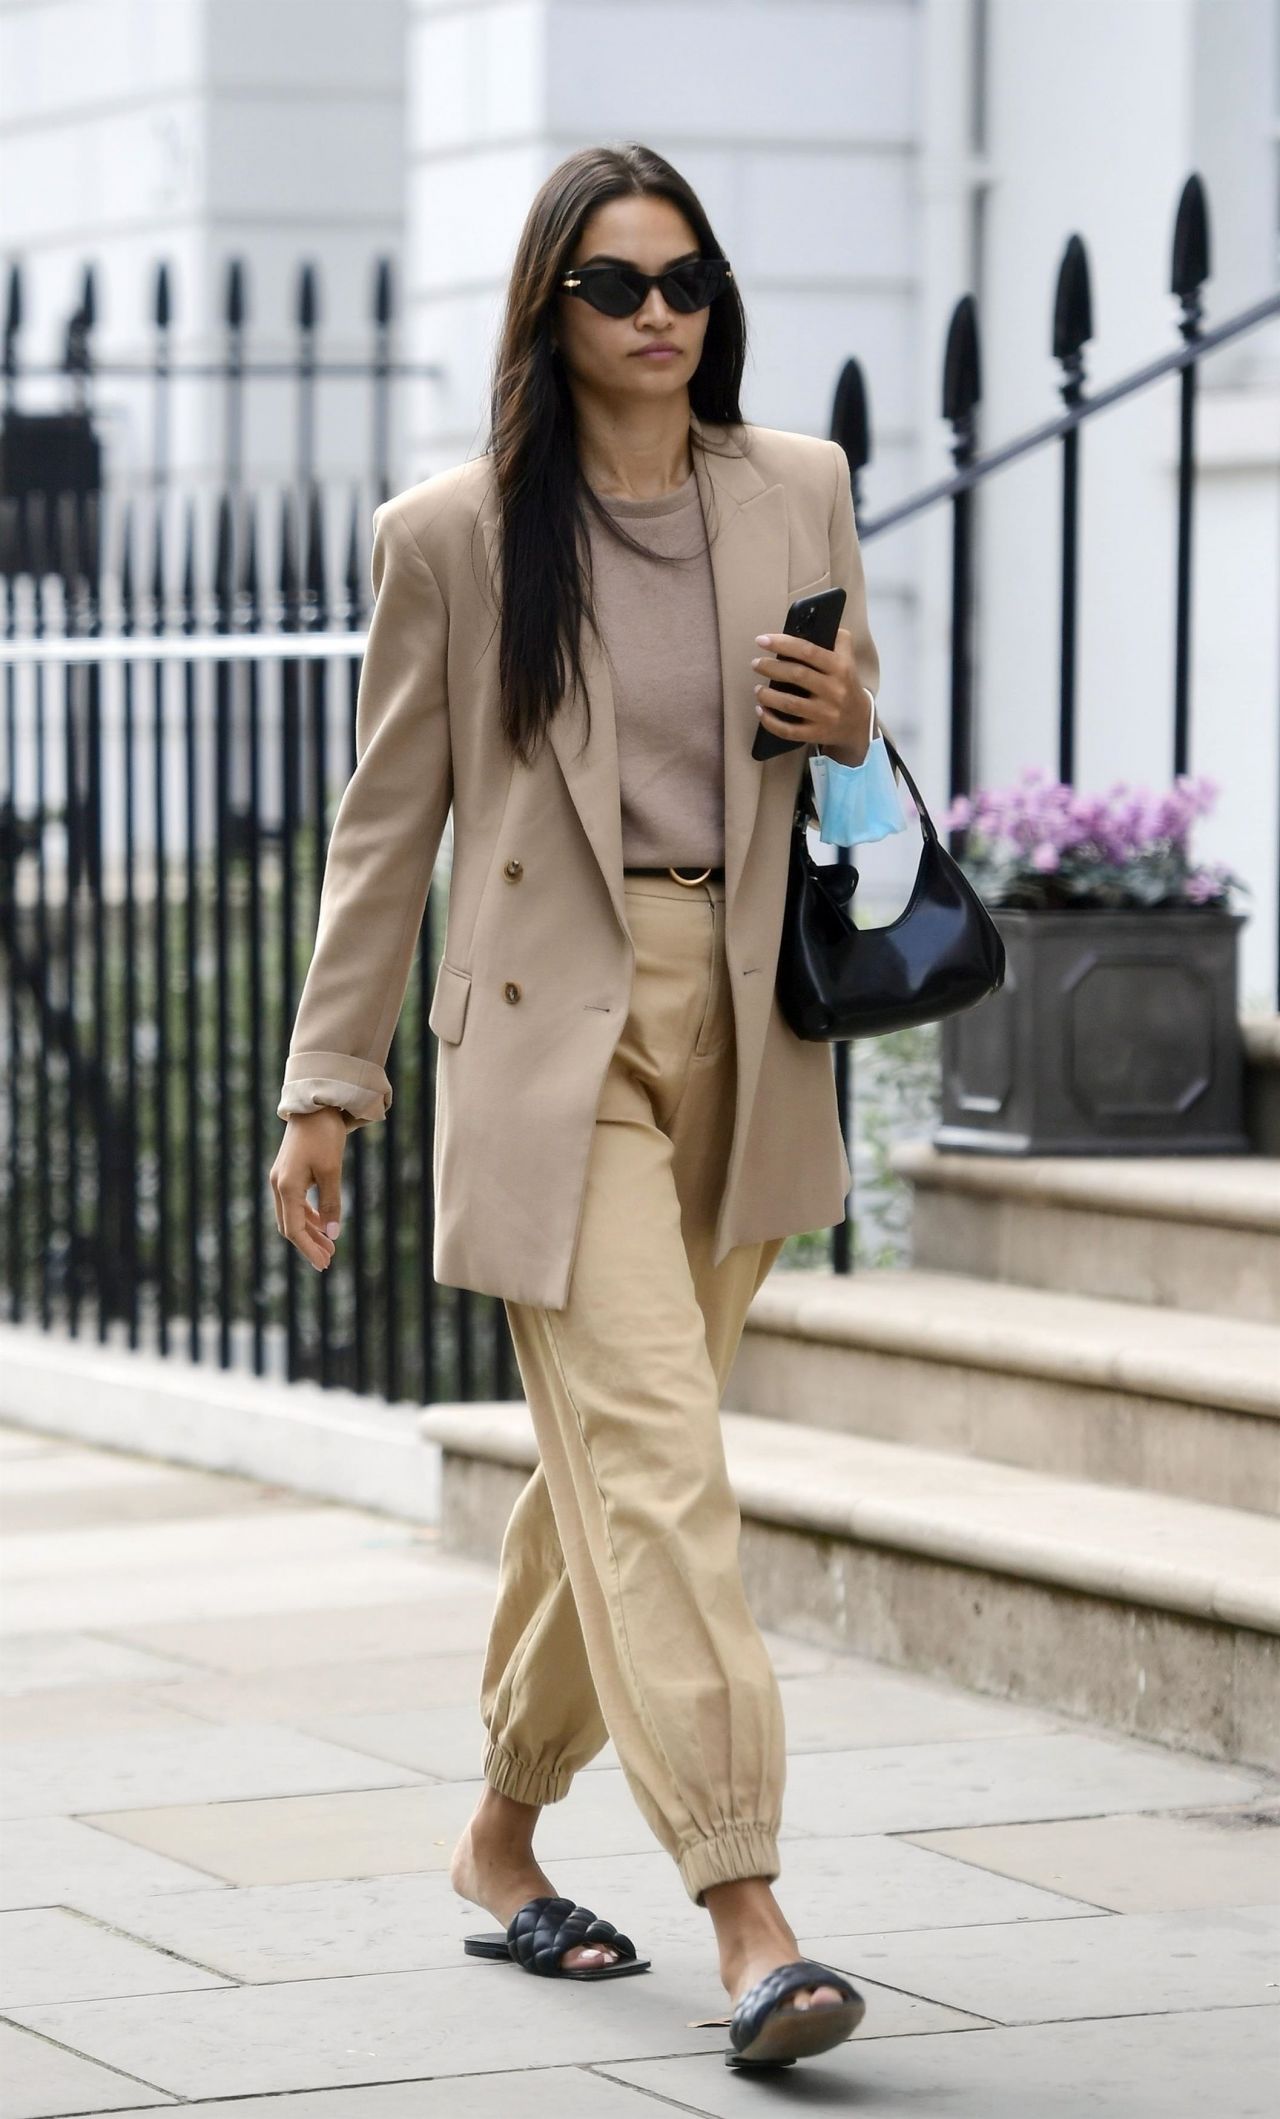 shanina-shaik-looking-stylish-in-a-beige-trousers-and-jacket-london-09-15-2020-4.jpg